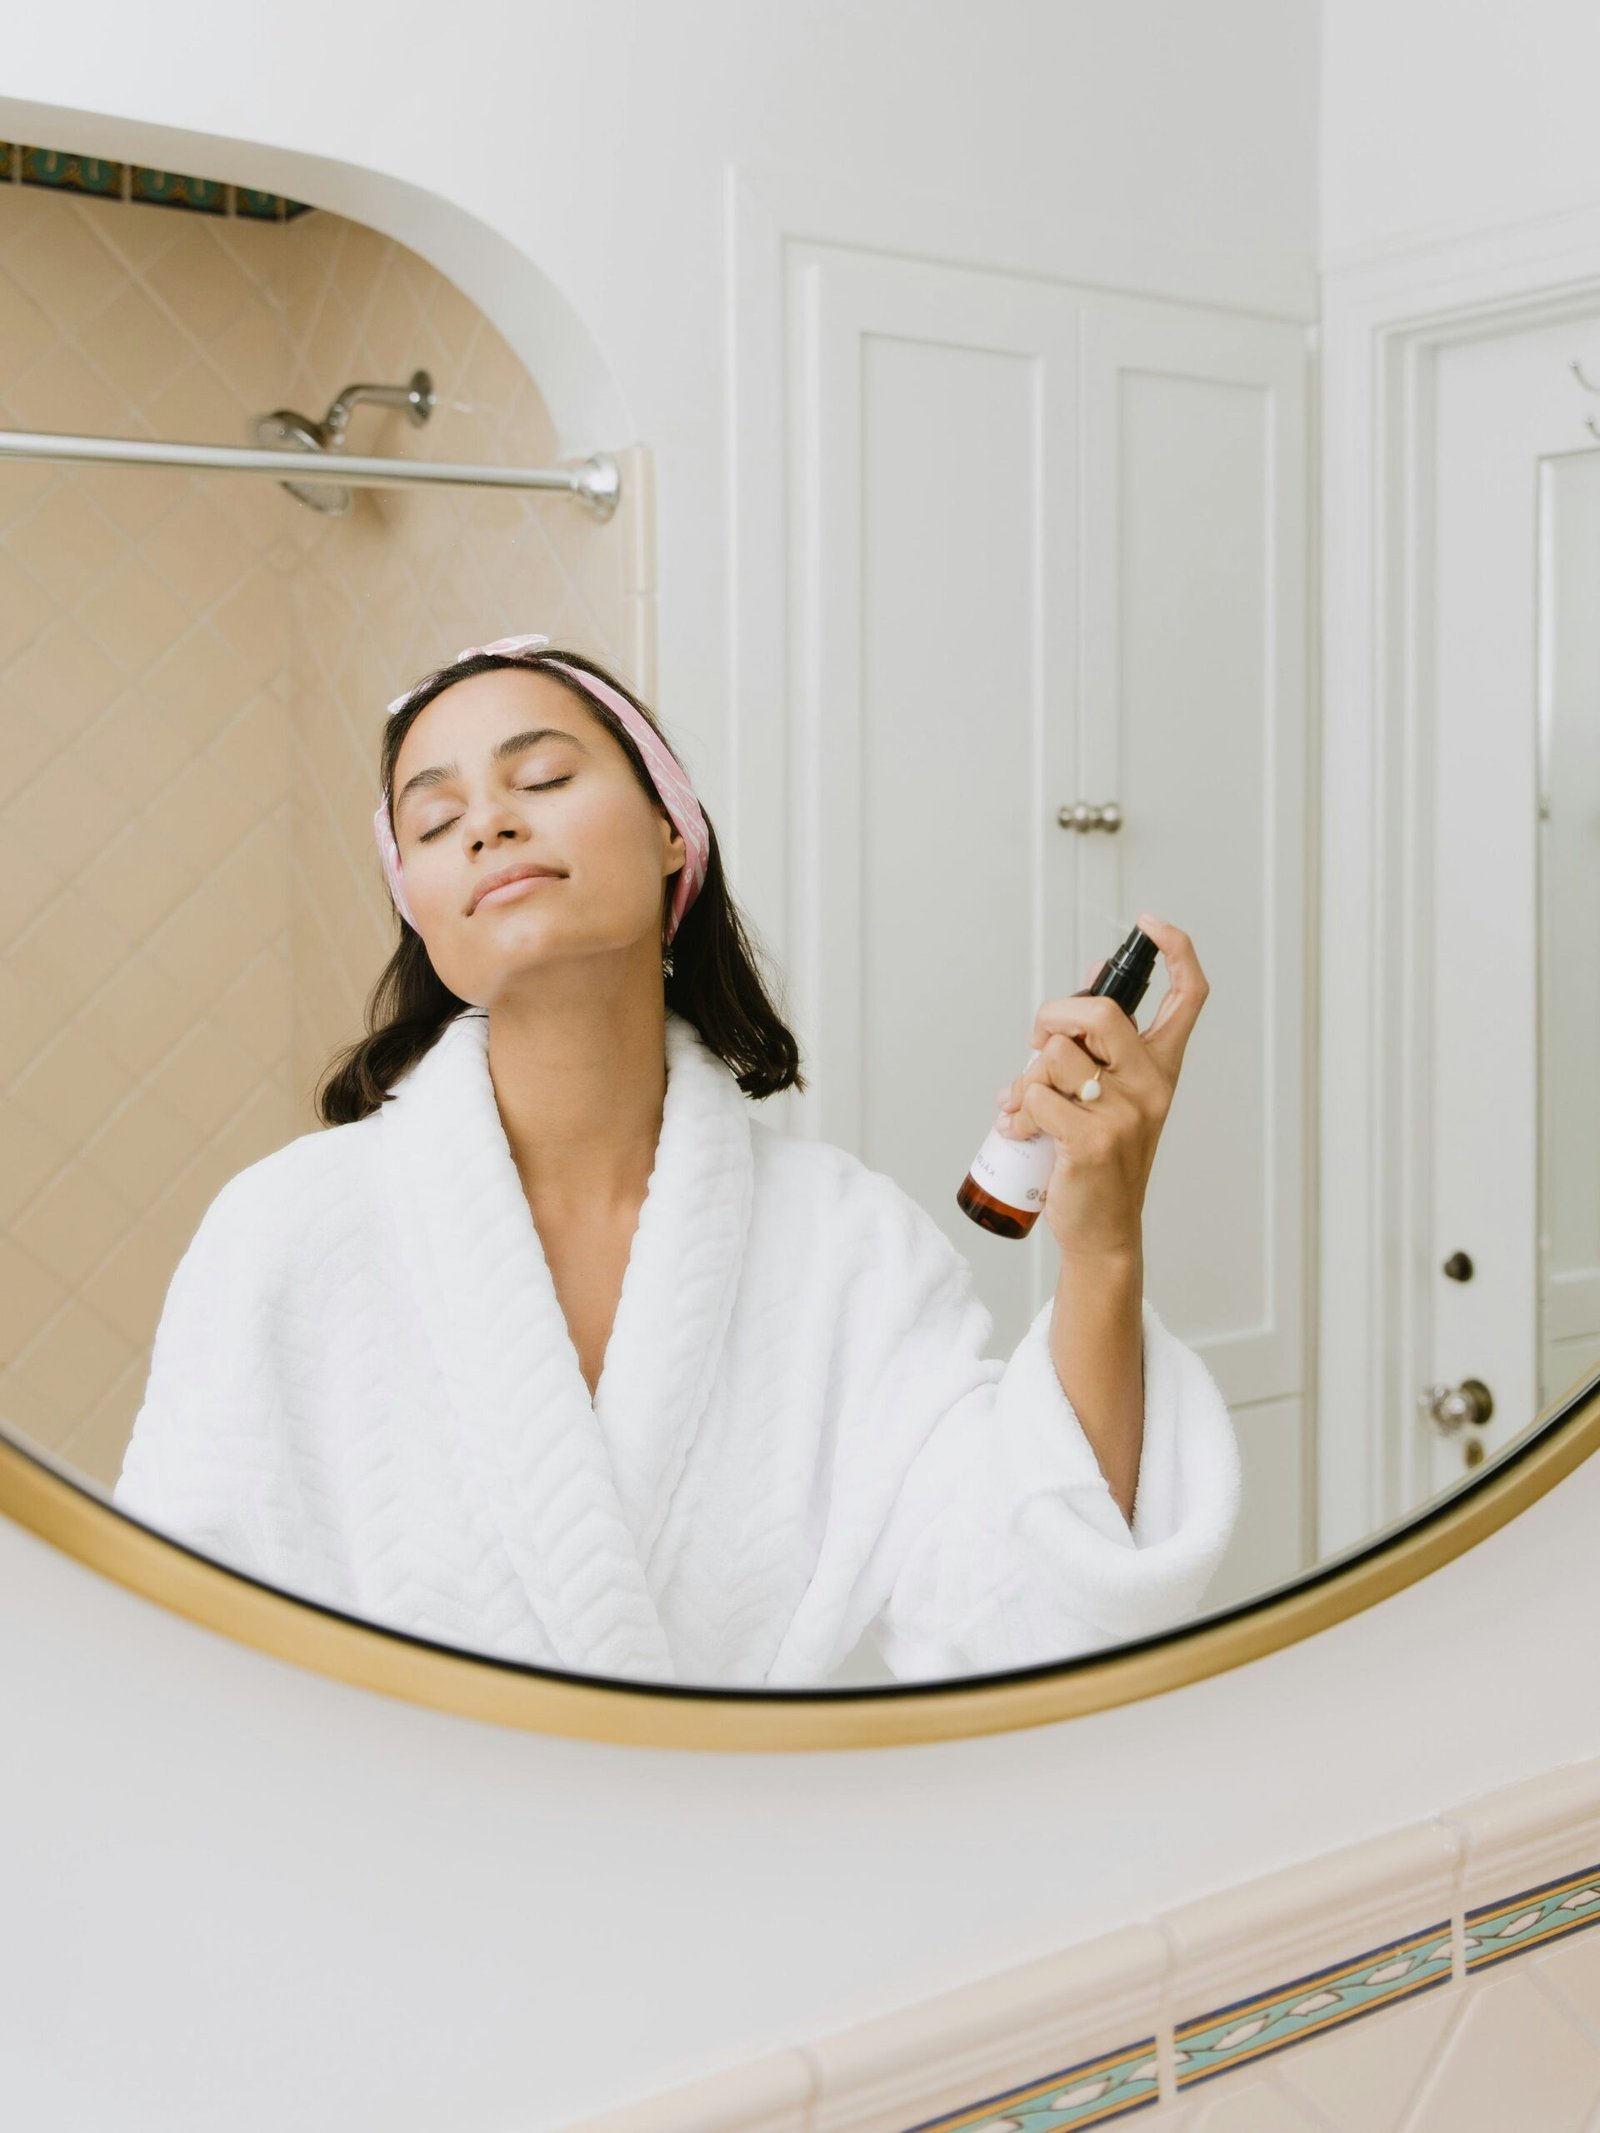 Three Things You should know about Skincare